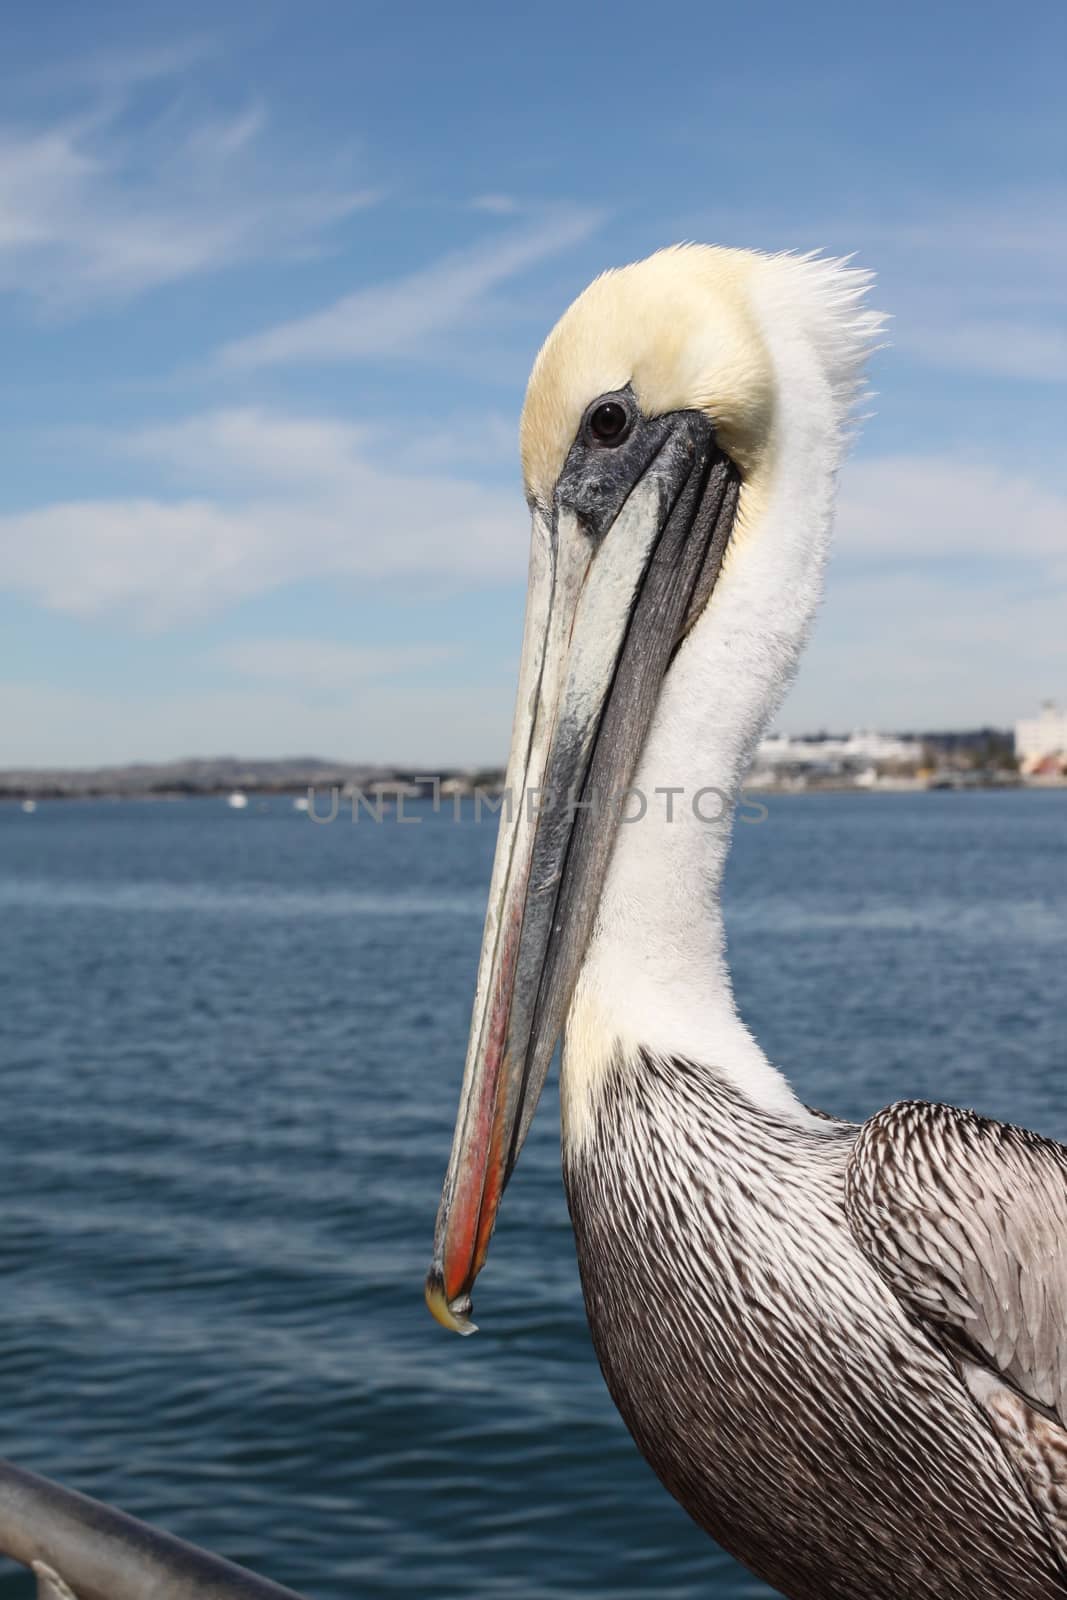 Grey pacific pelican with blue sky and water in the background.